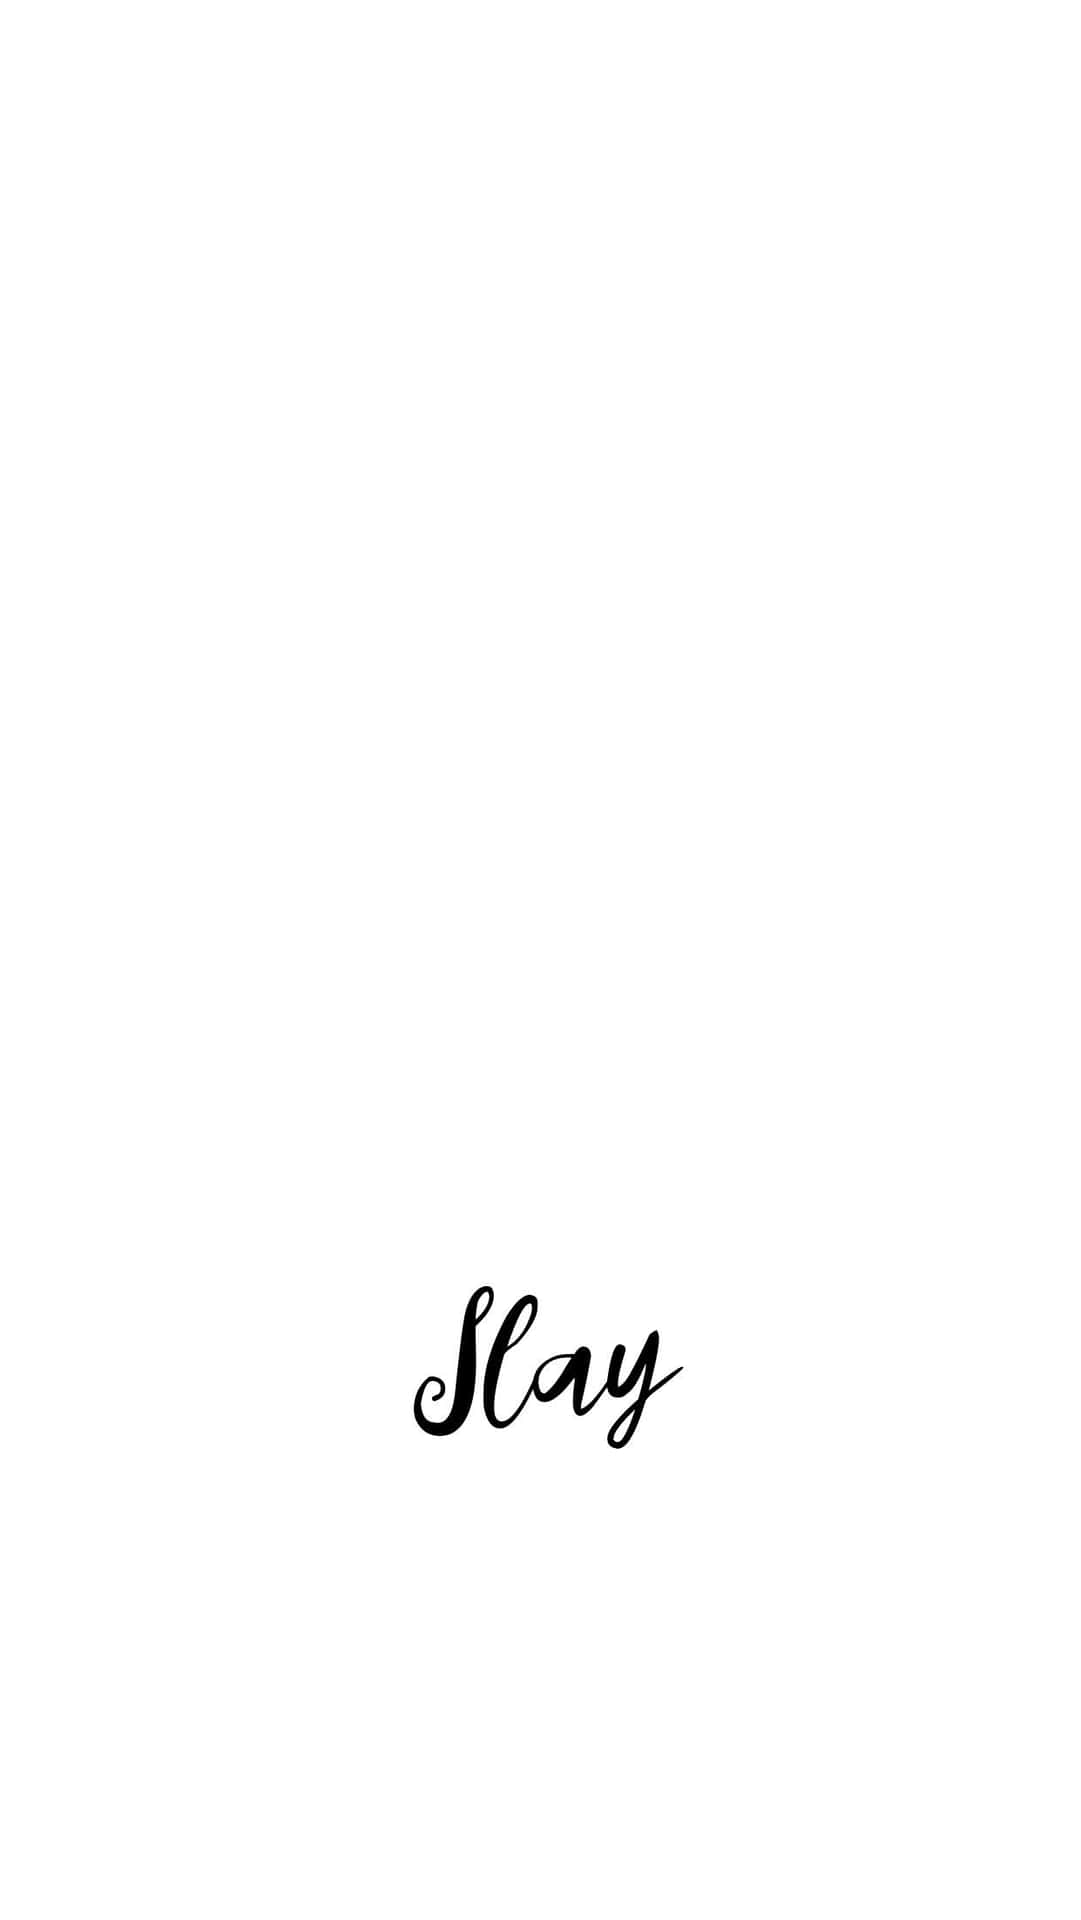 A Black And White Image Of The Word Slay Wallpaper